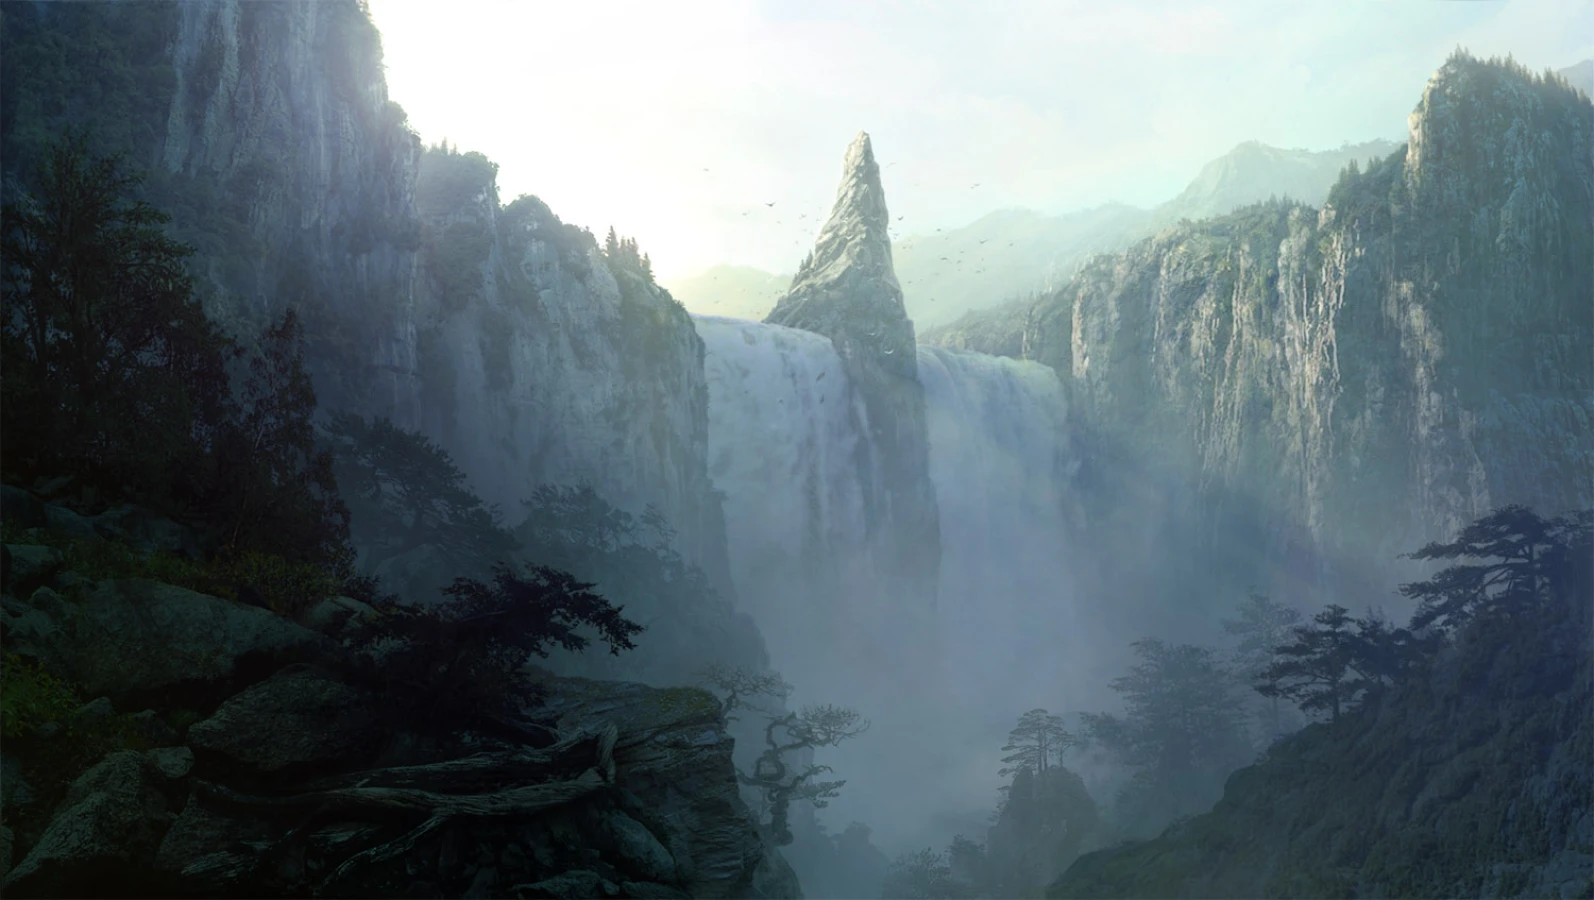  Waterfall digital matte painting by Dusso 